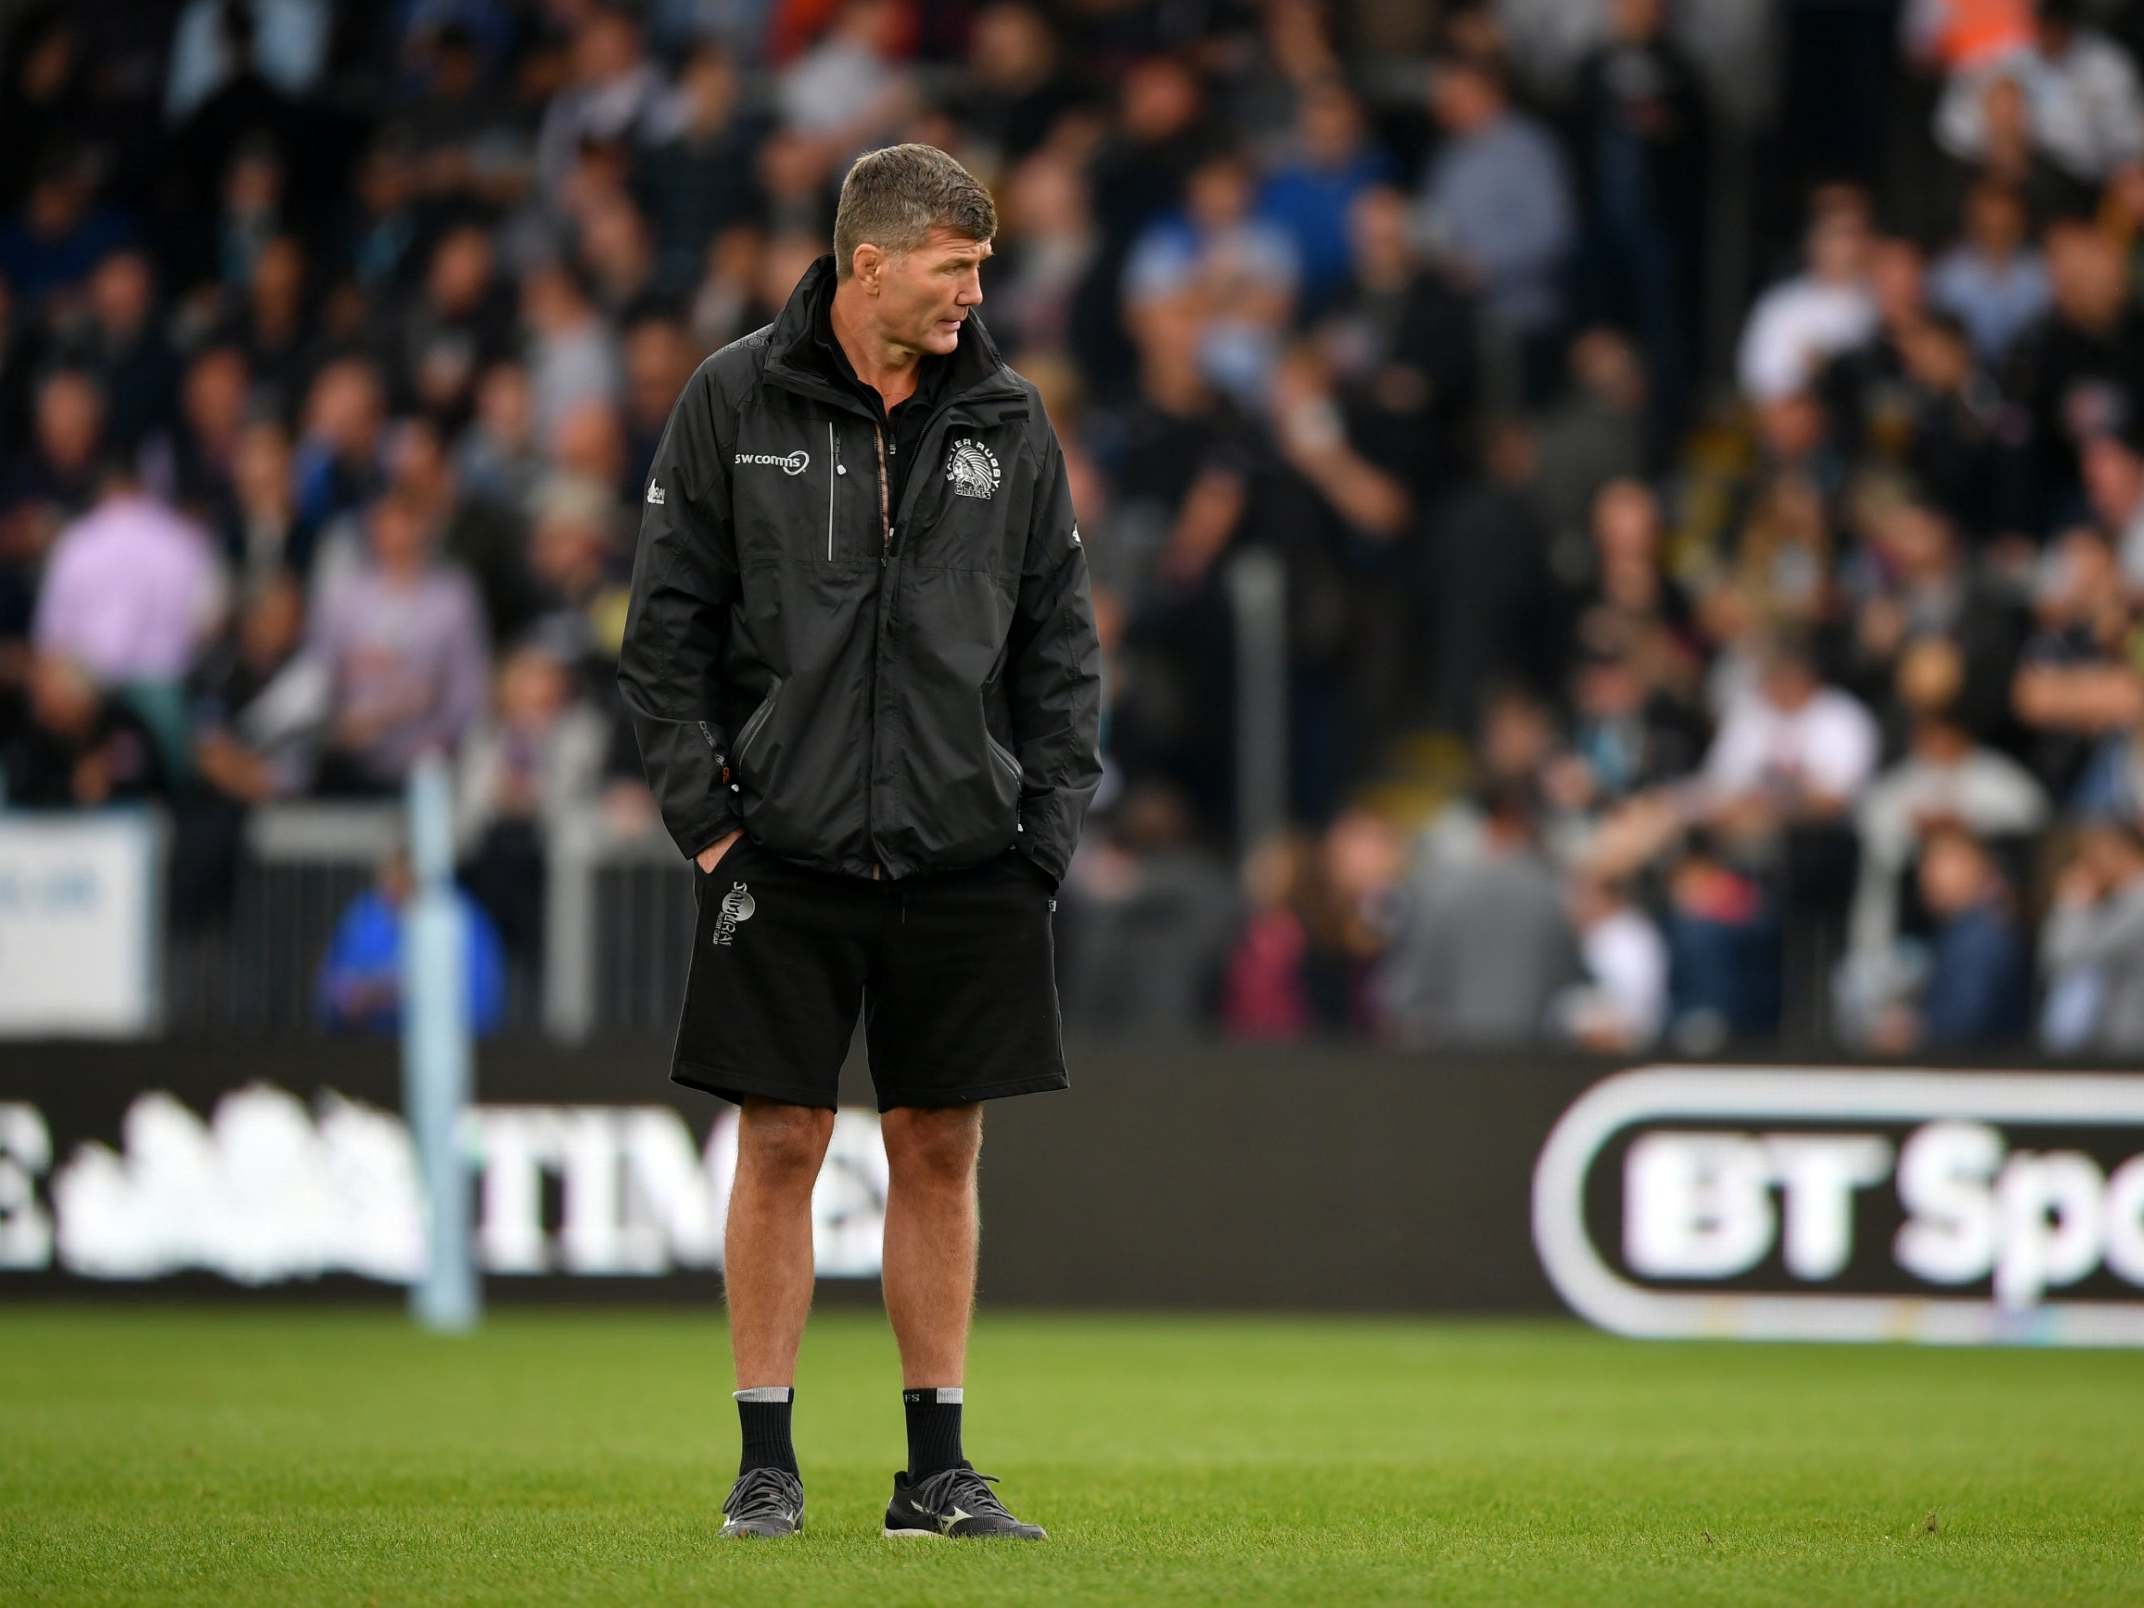 Exeter will have to do lots of small things well, says Baxter